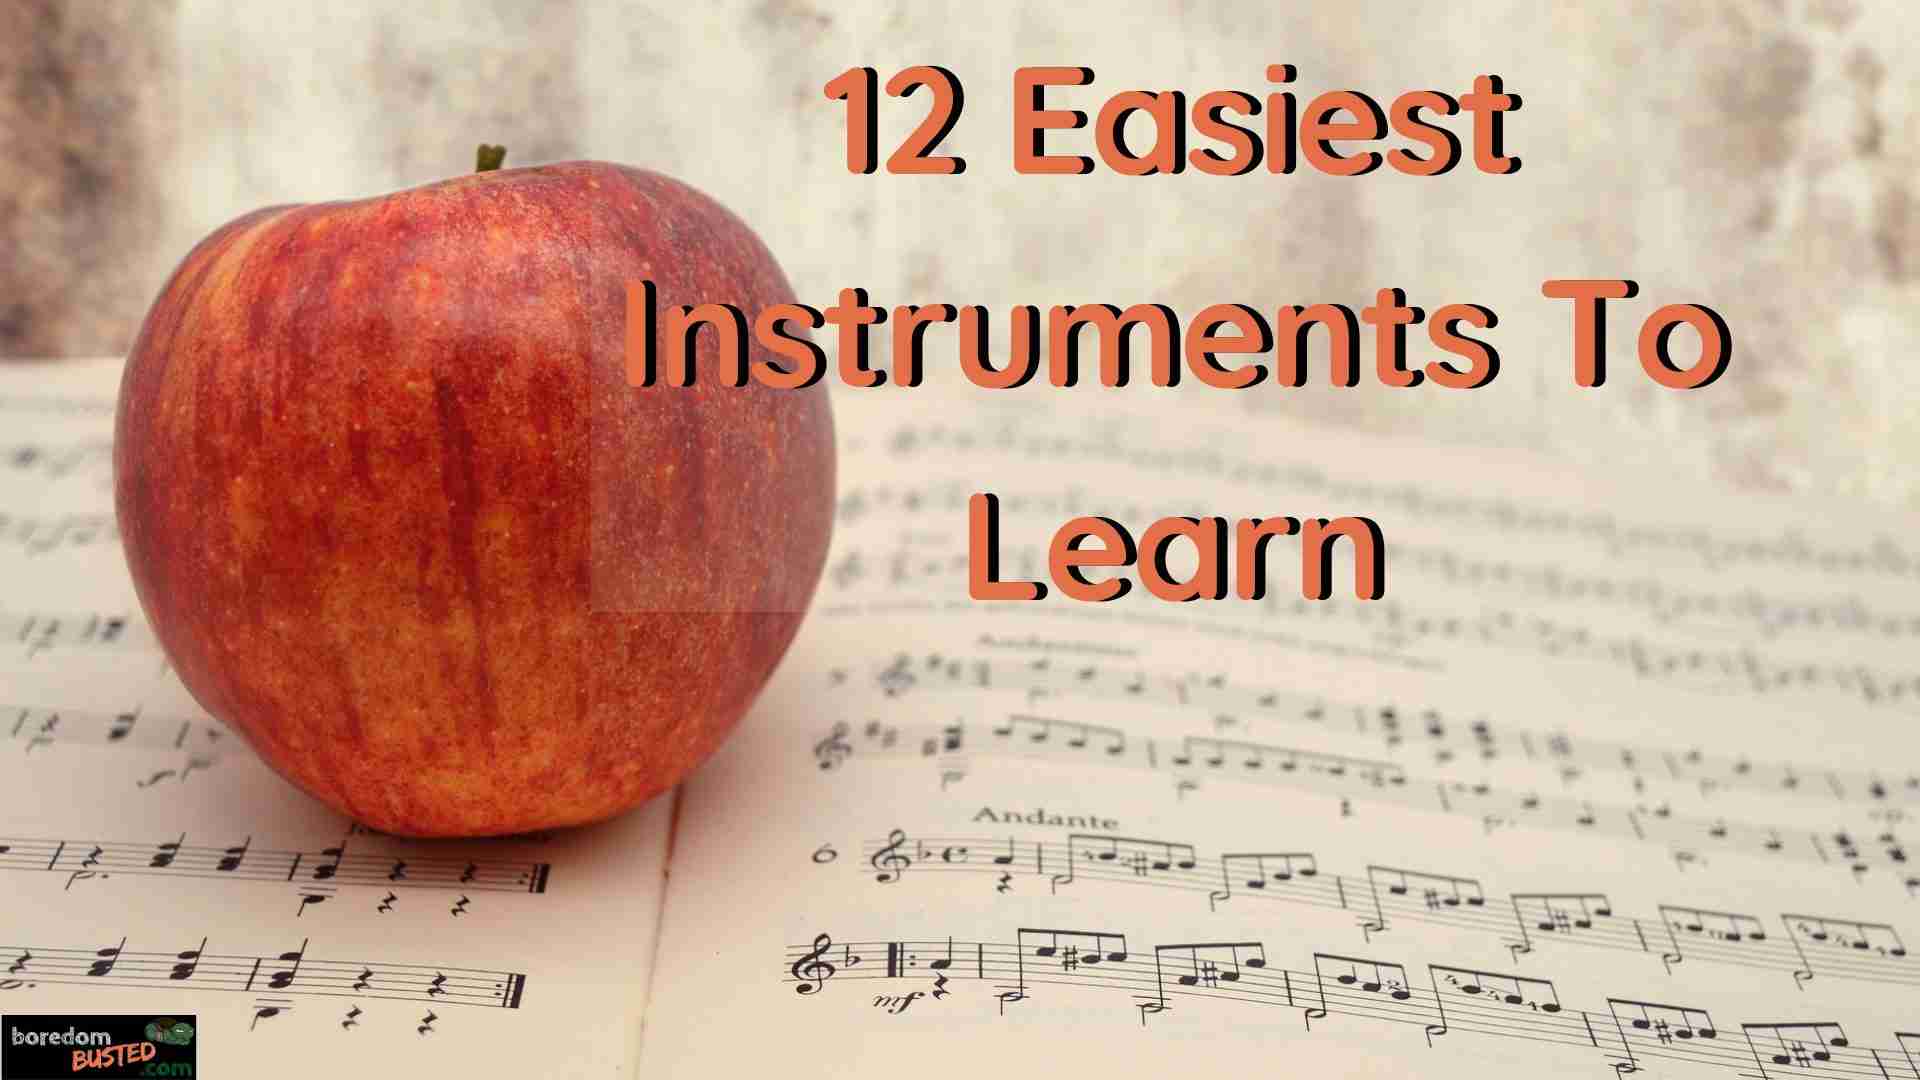 "12 easiest instruments to learn"